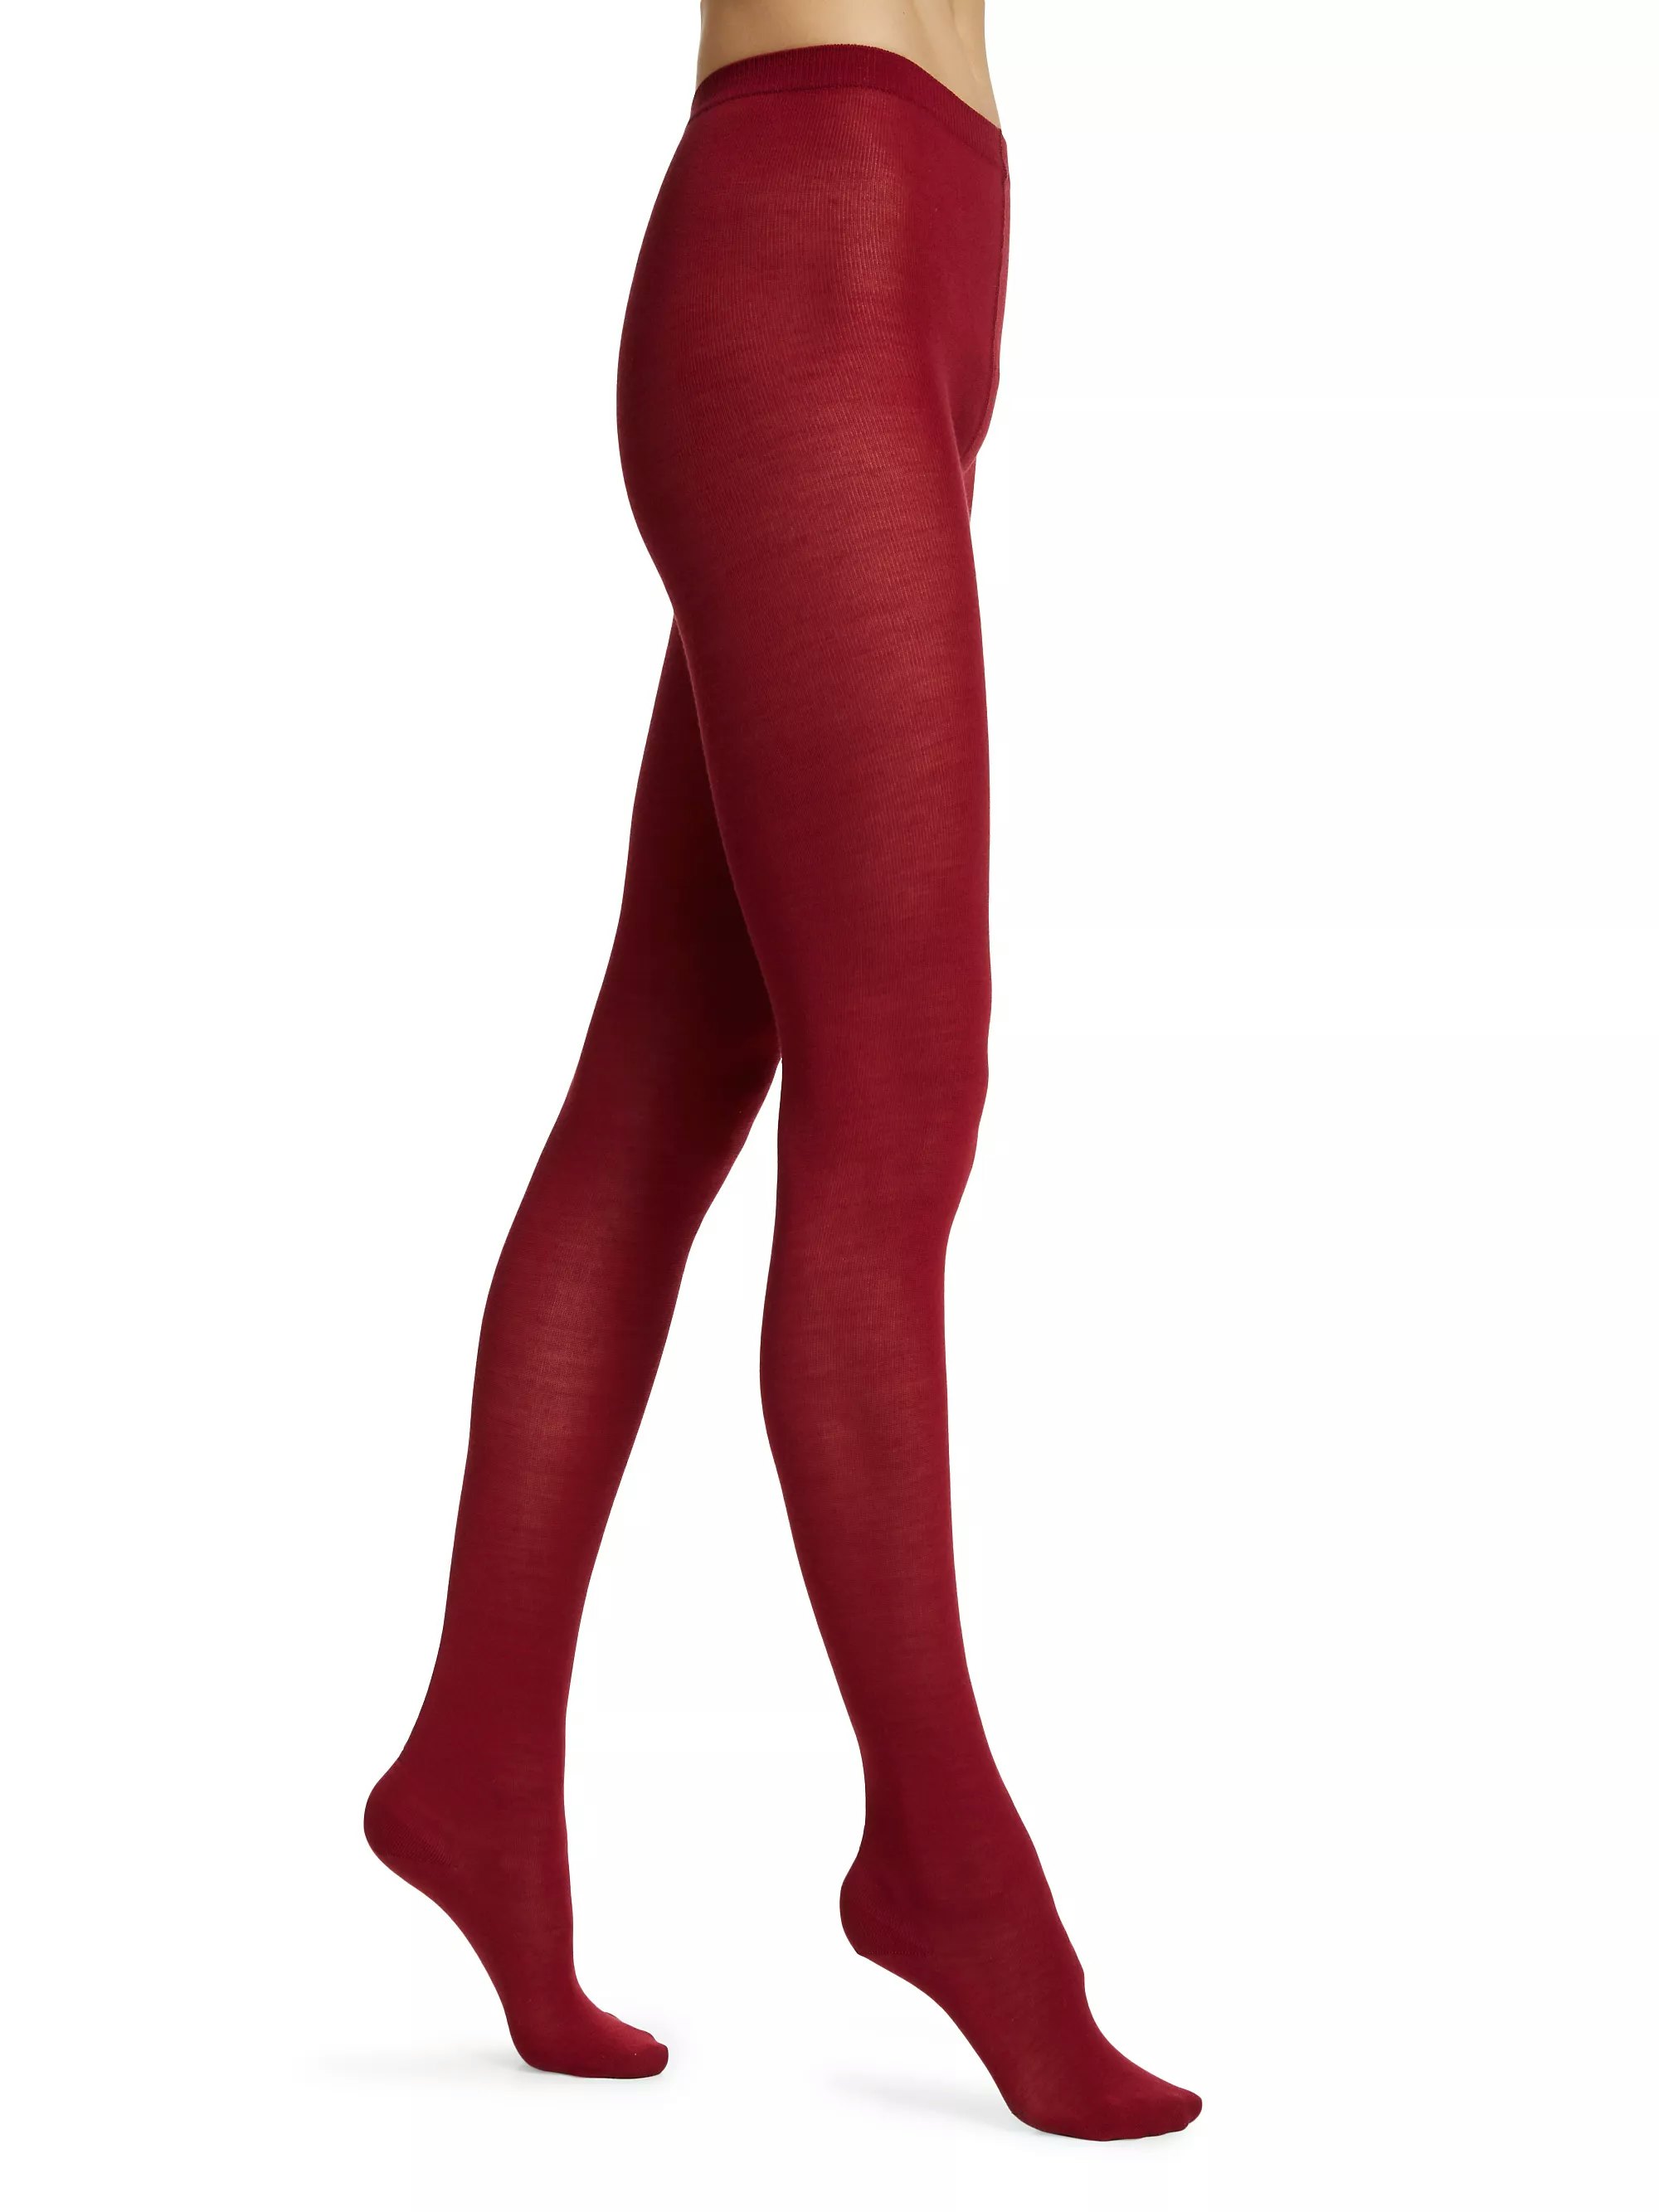 Was curious about styling out red tights, I wanted to see how I